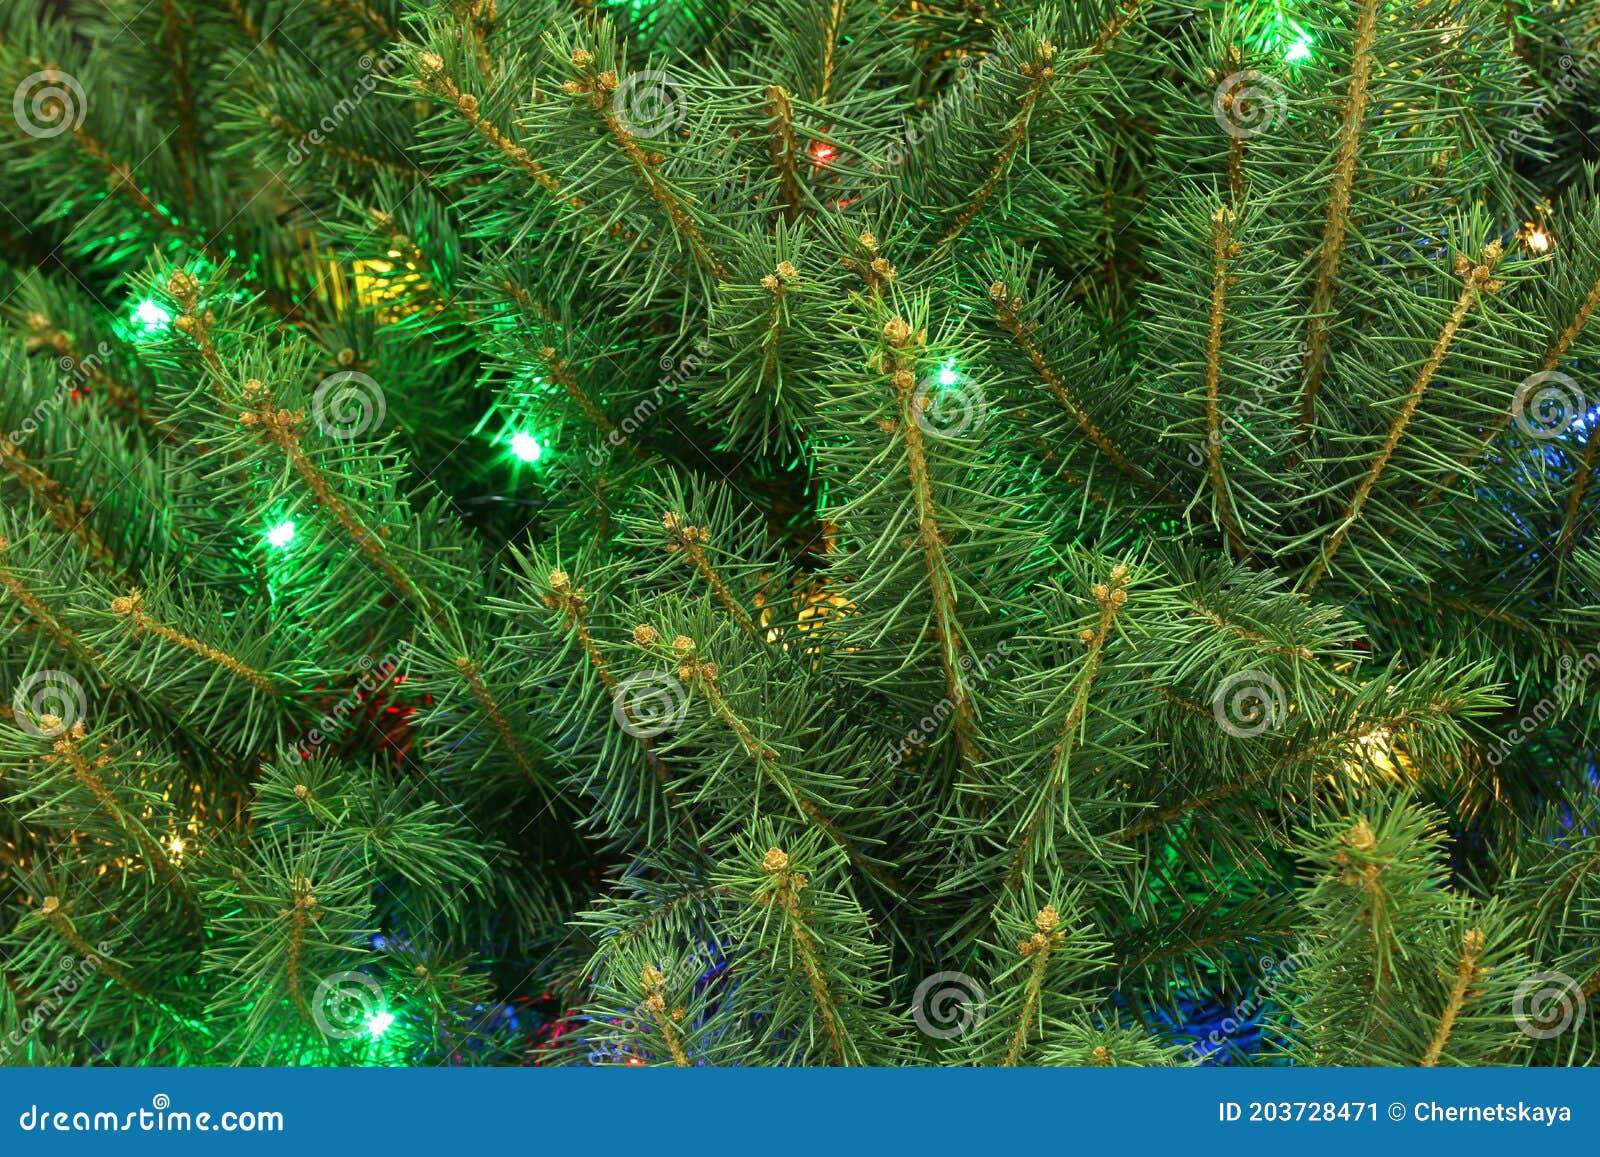 Glowing Bright Fairy Lights on Christmas Tree Stock Image - Image of ...